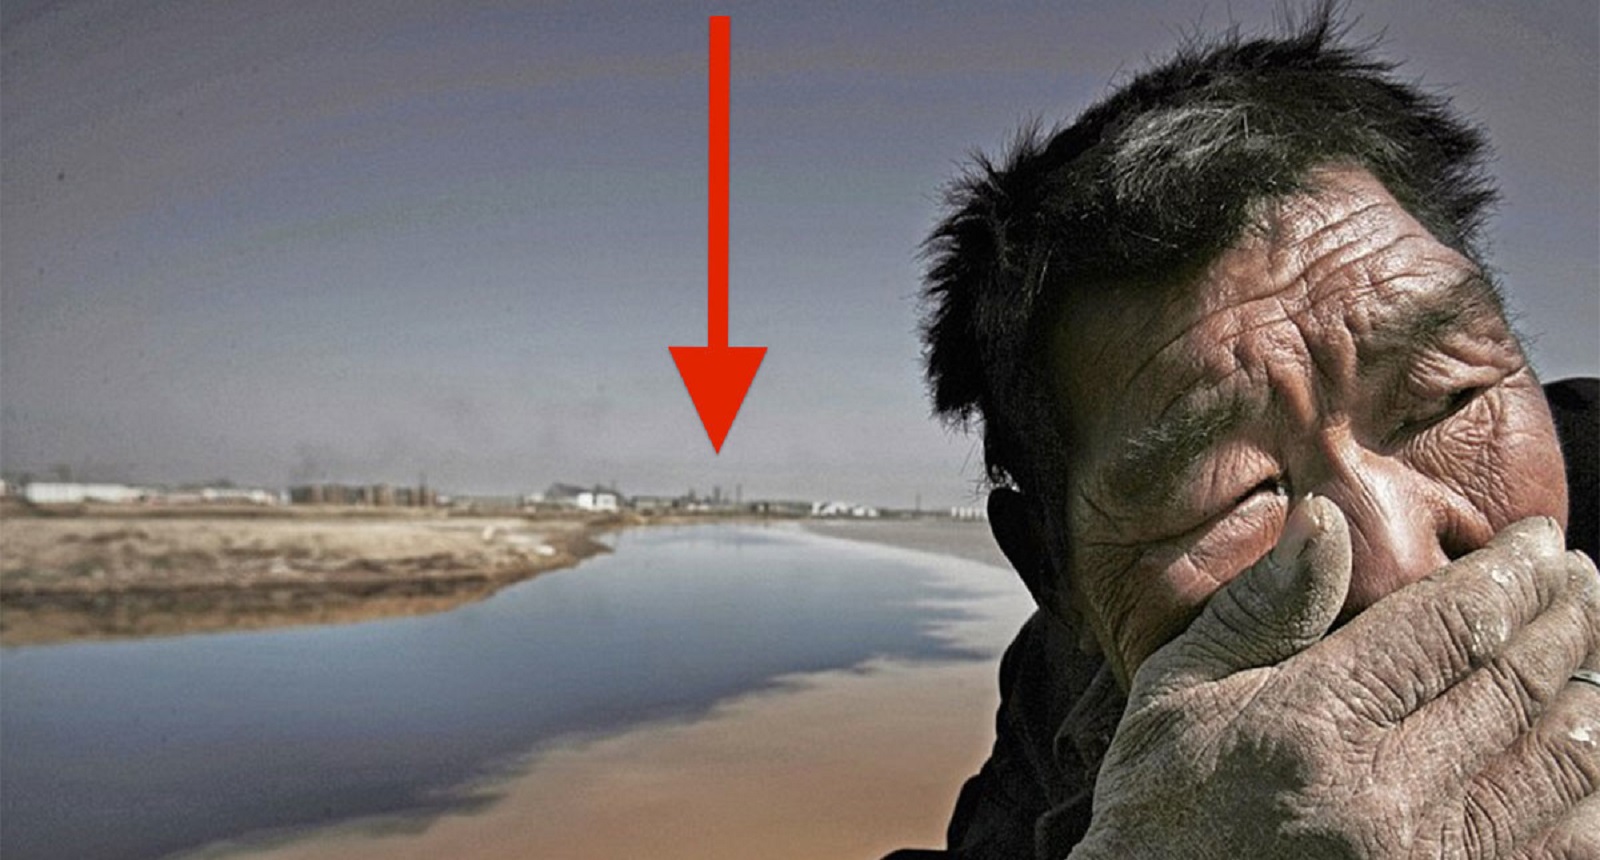 20 Pictures That Prove That Humanity Is In Danger